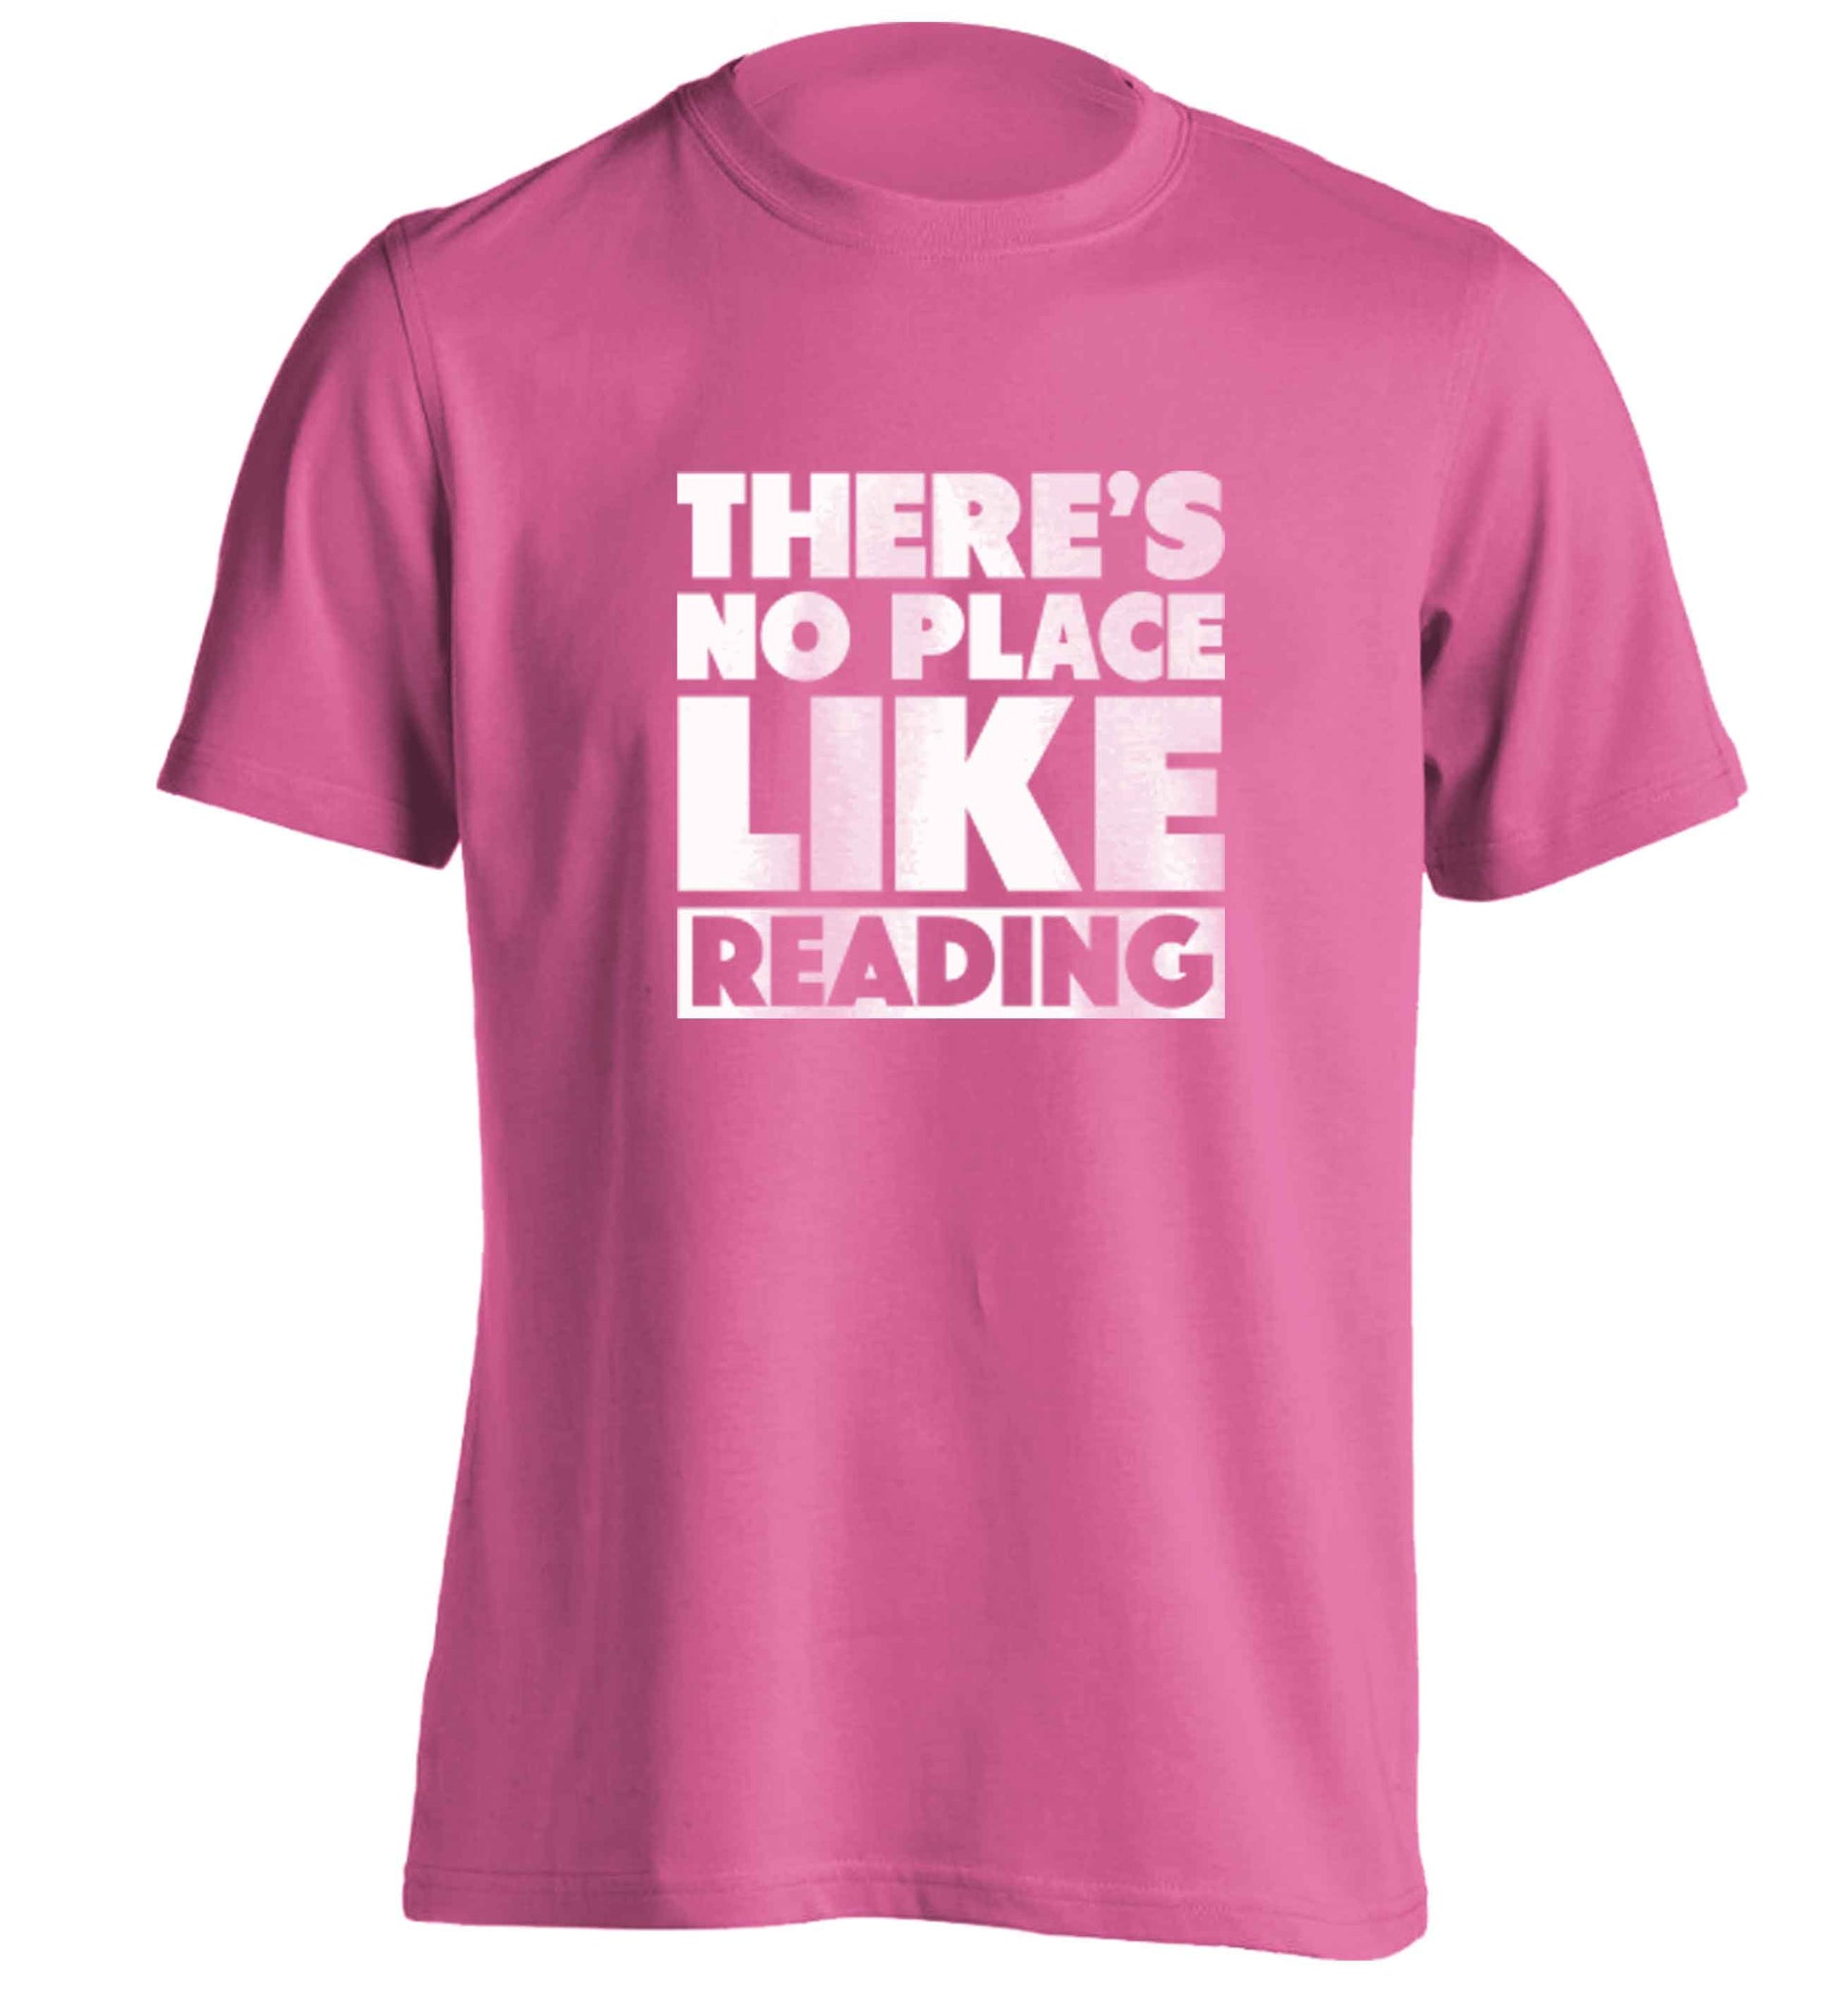 There's no place like Readingadults unisex pink Tshirt 2XL